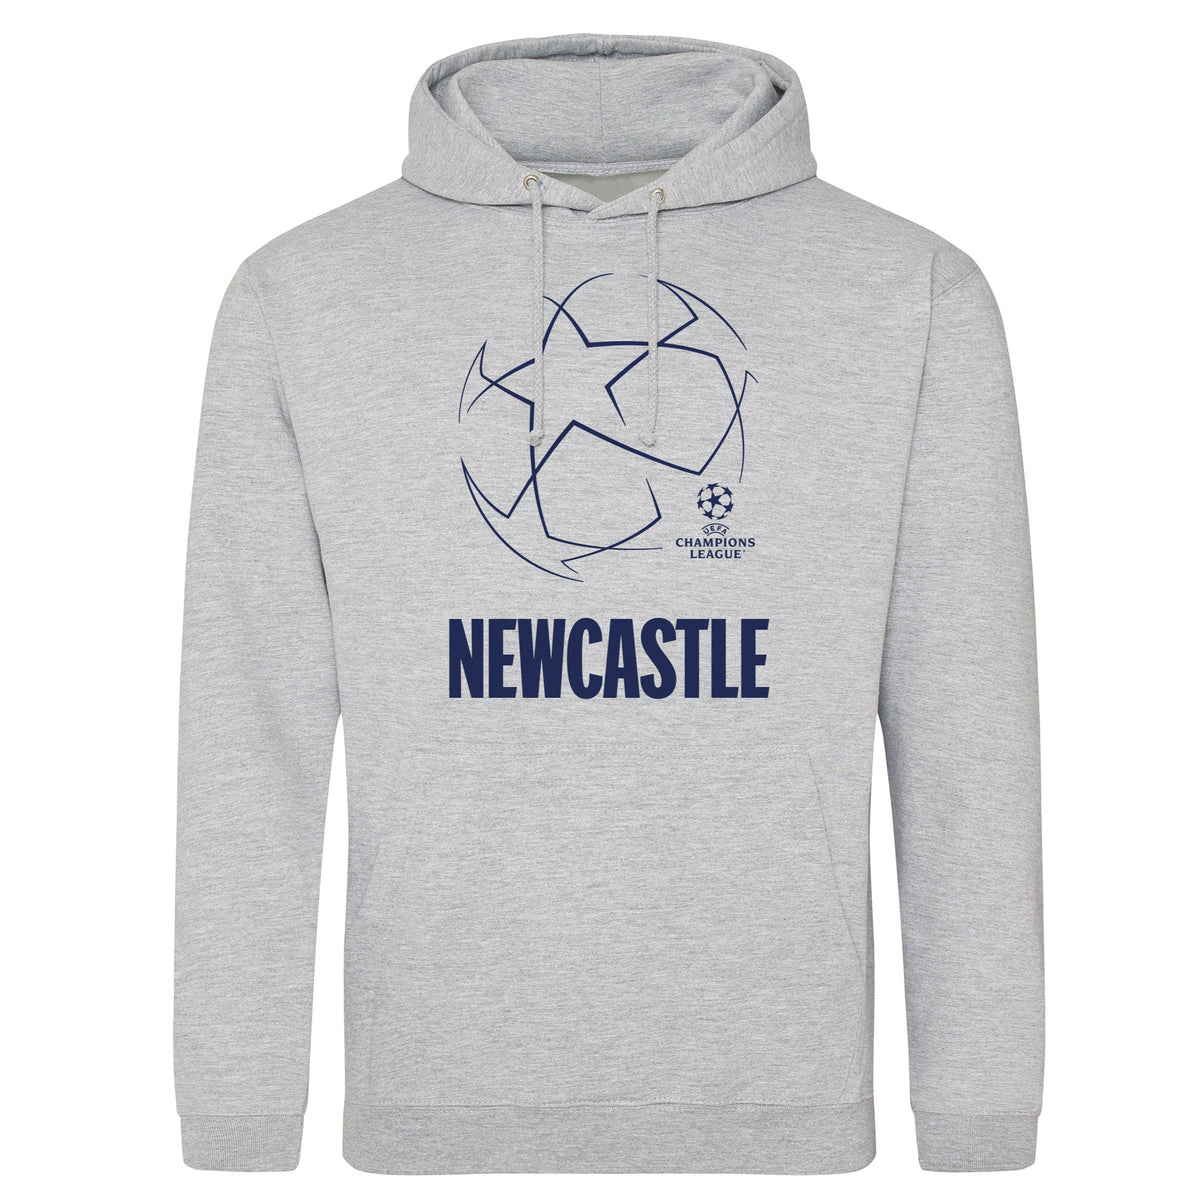 Champions League Starball Newcastle City Hoodie Grey